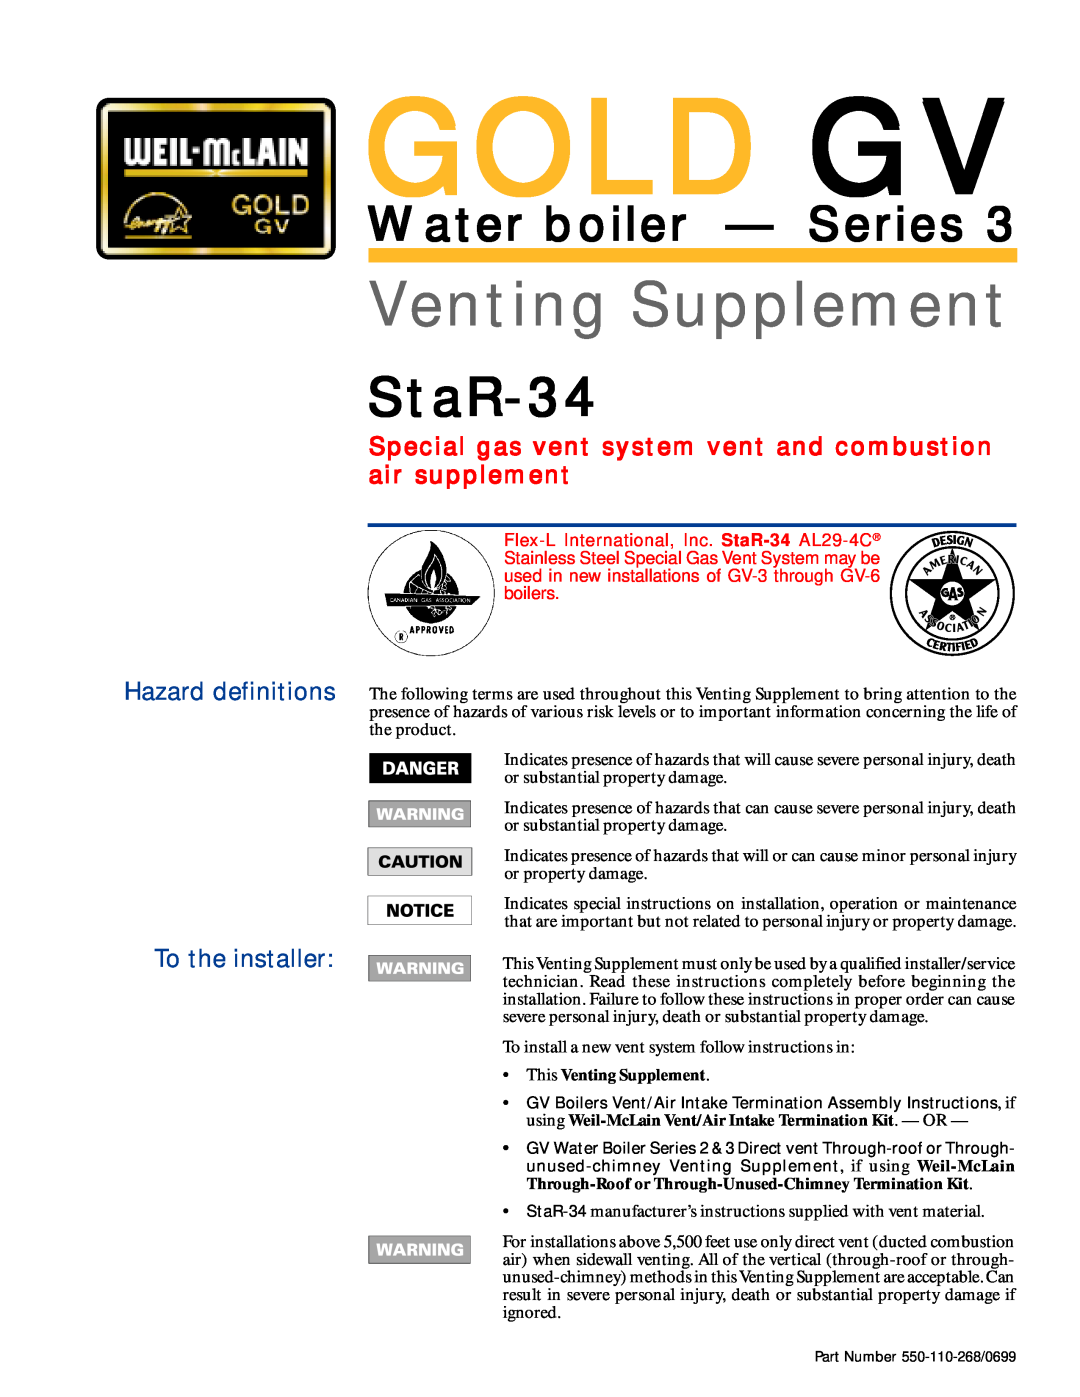 Weil-McLain STAR-34 manual Hazard definitions To the installer, This Venting Supplement, Gold Gv, StaR-34 